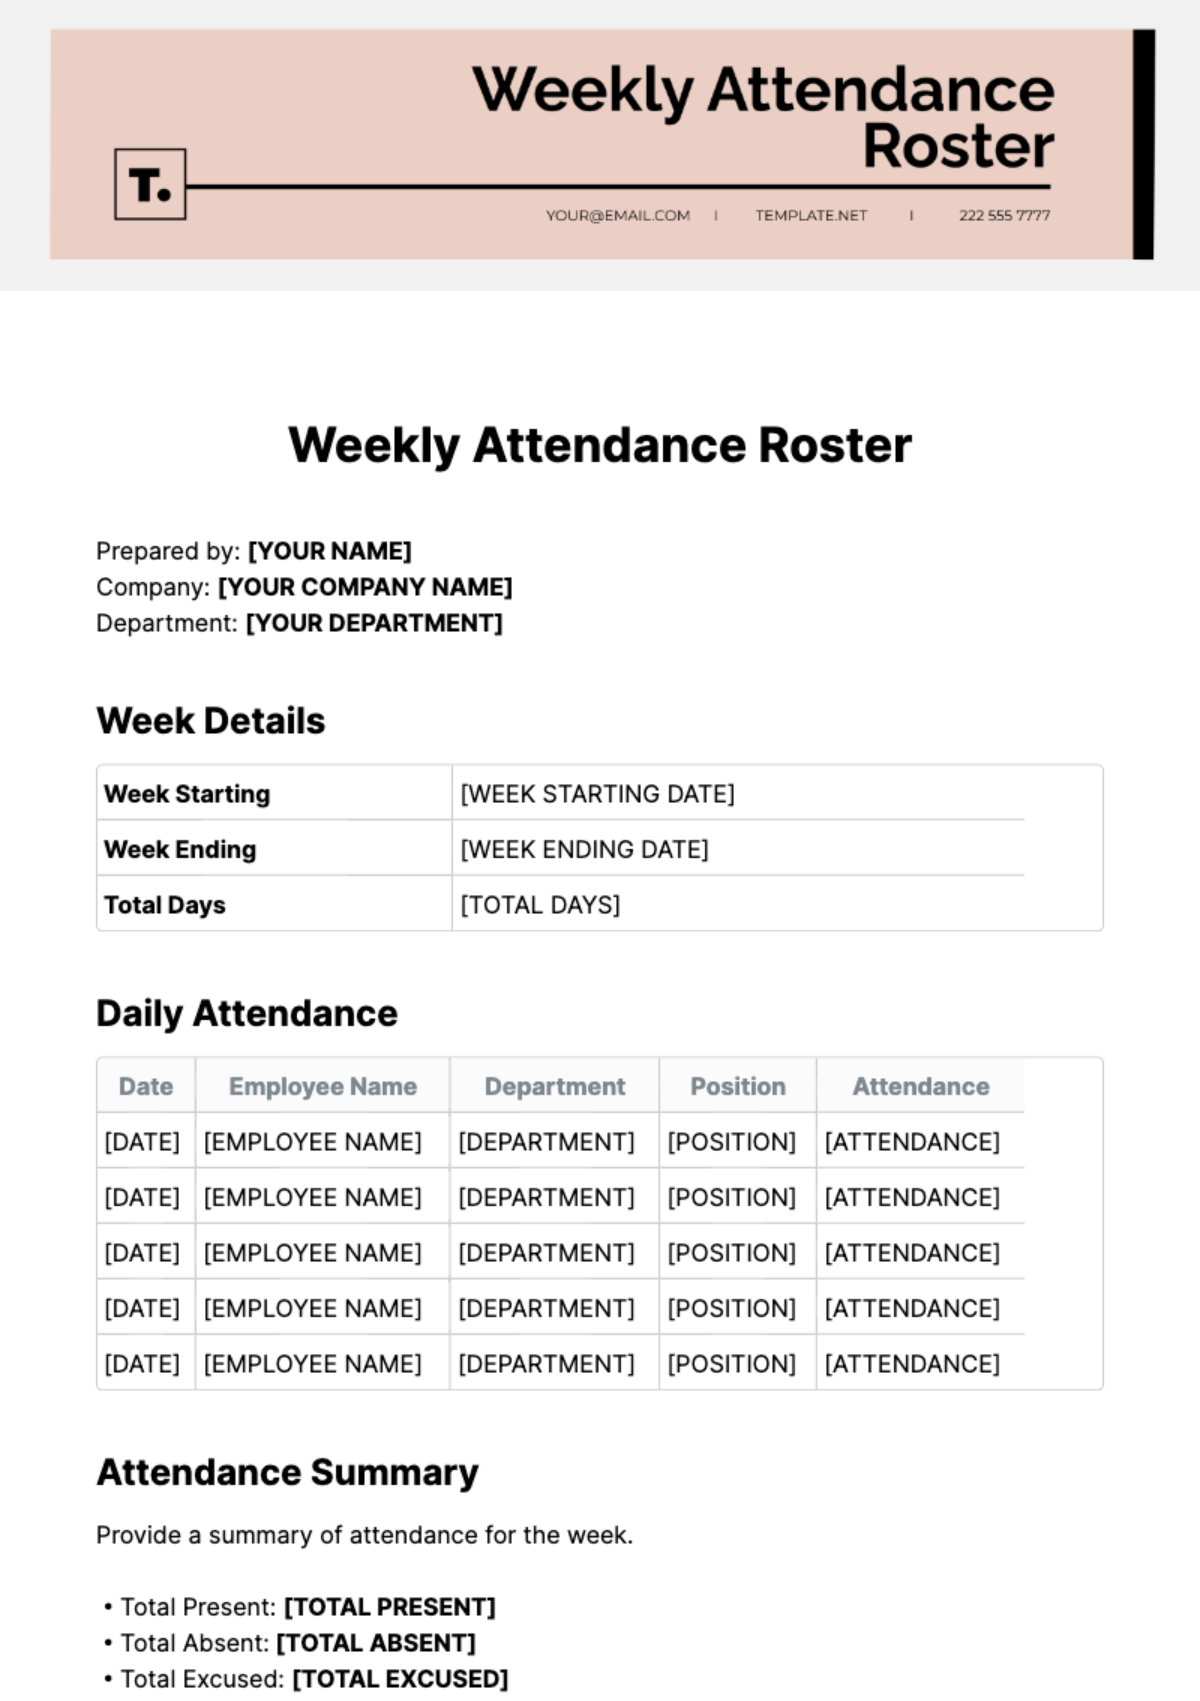 Weekly Attendance Roster Template